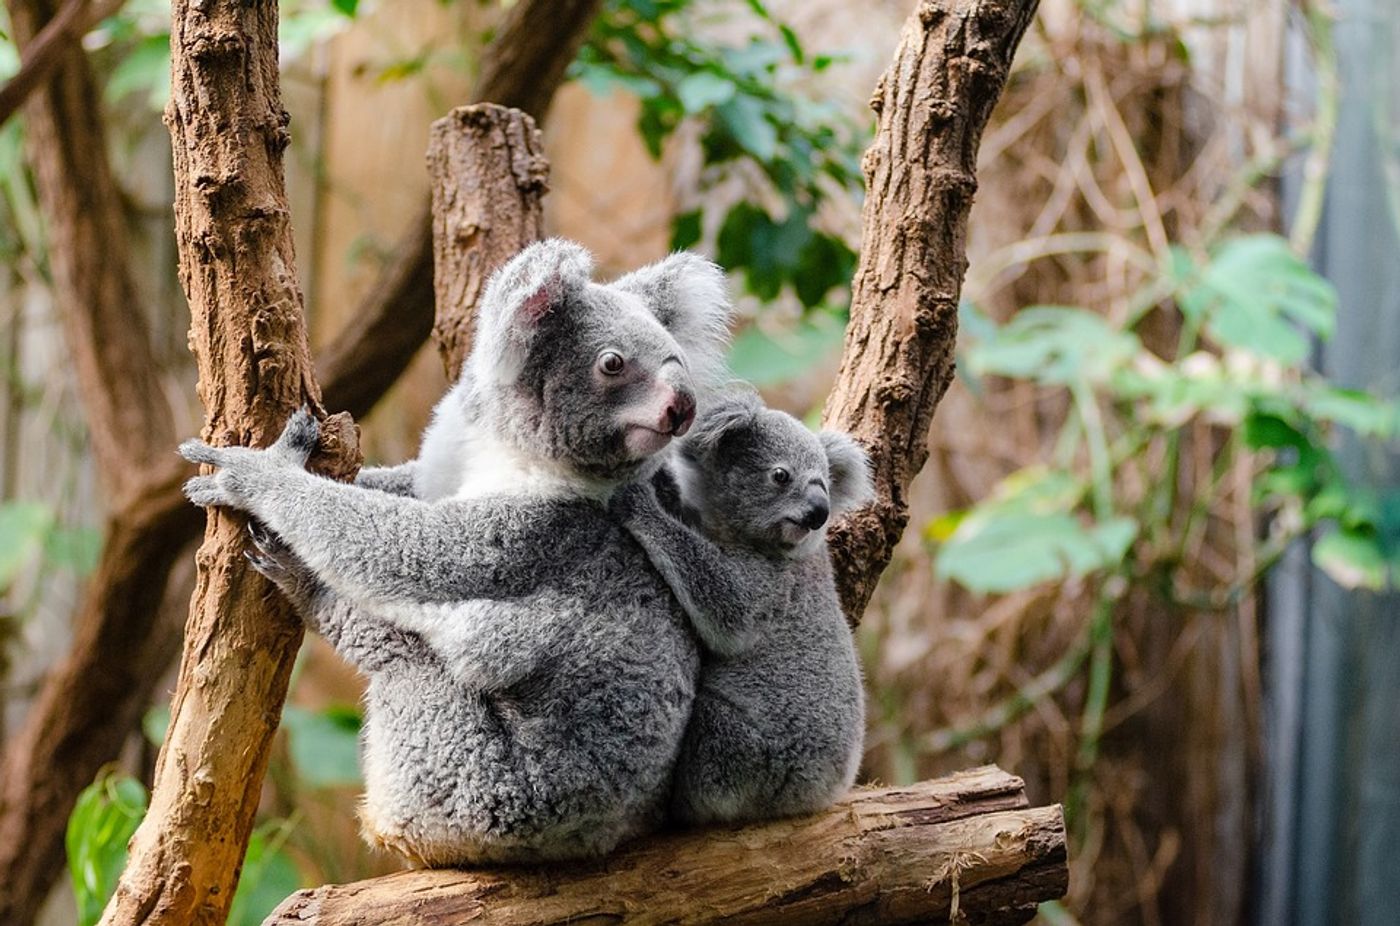 Drones might be able to spot koalas more effectively than people can.